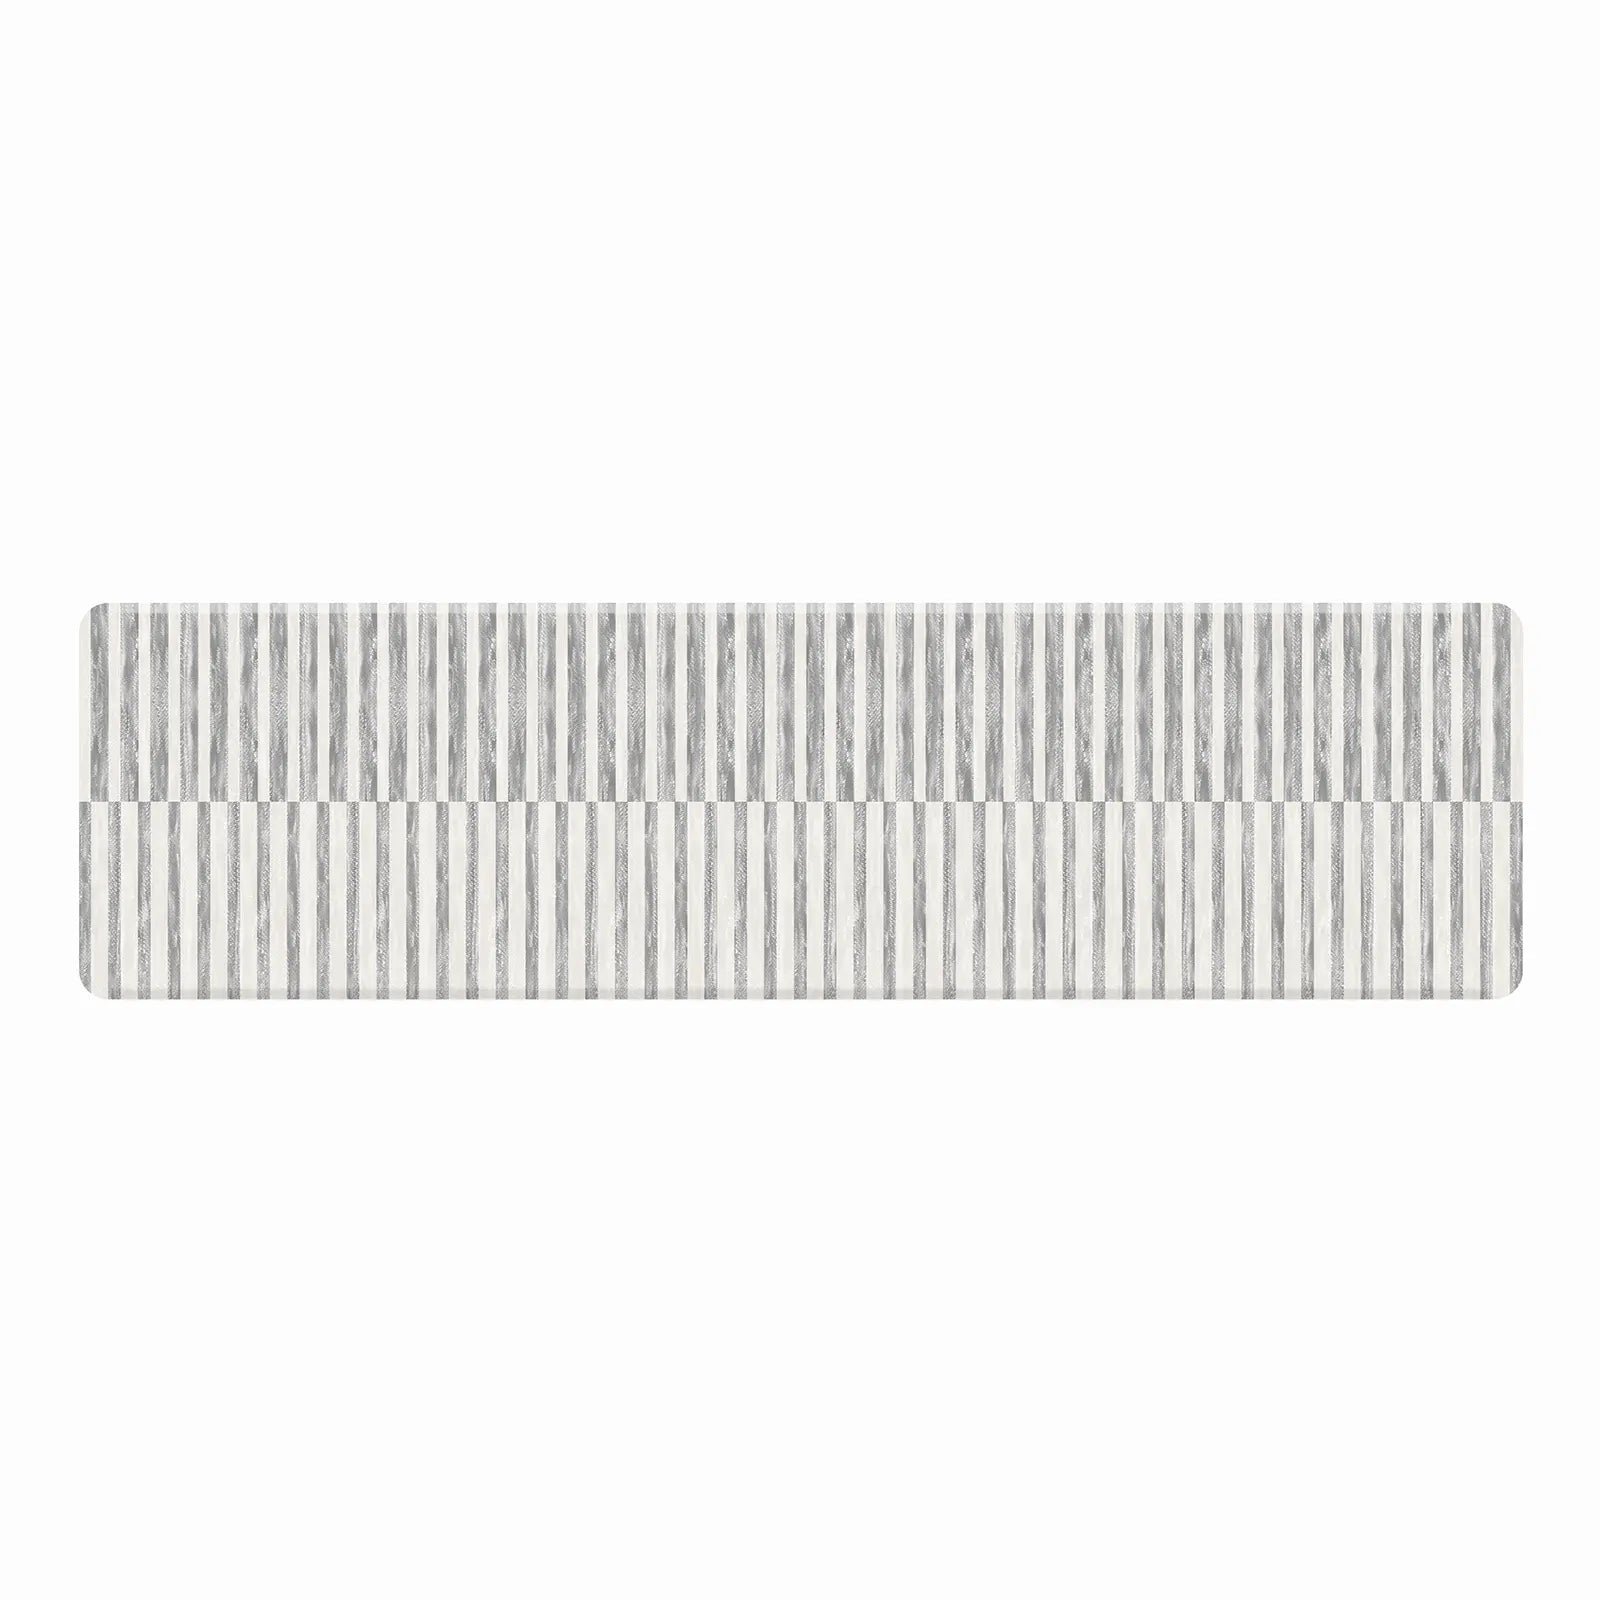 Reese pewter gray and white inverted stripe standing mat shown in size 30x108